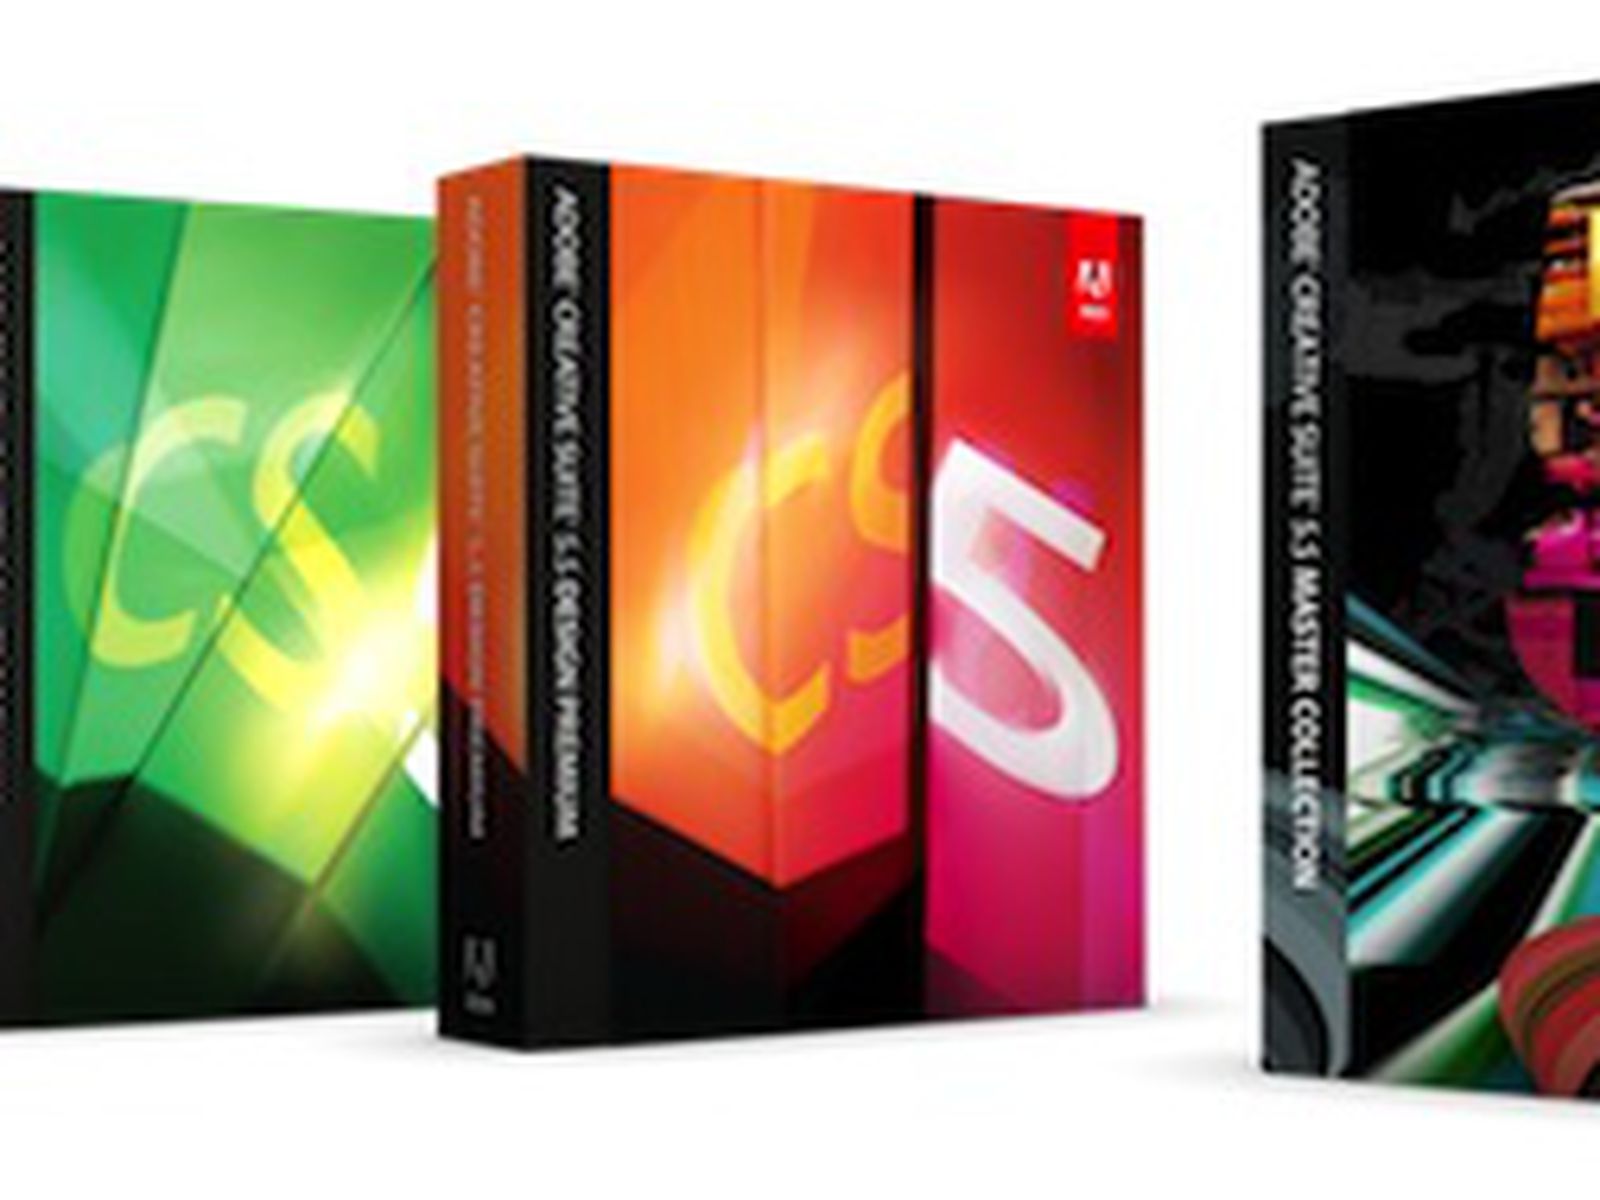 Adobe Releases Creative Suite 5.5, Adds Support for iPad Apps to